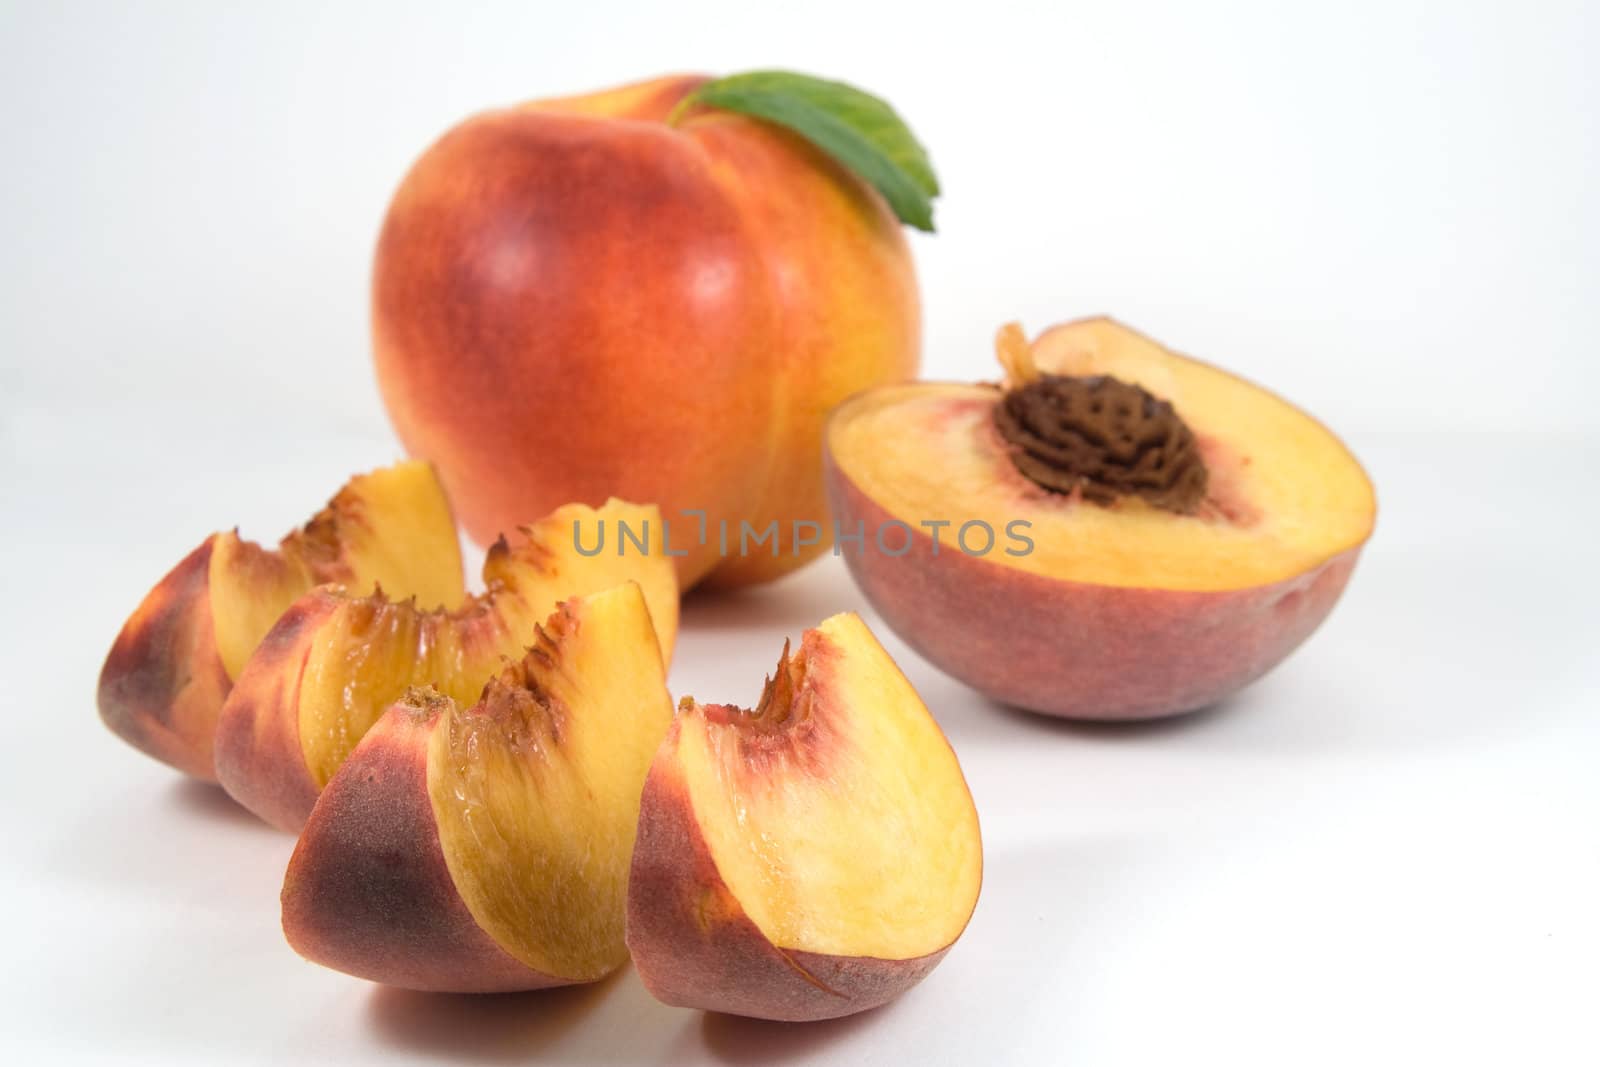 Nectarine and half of peach by serpl